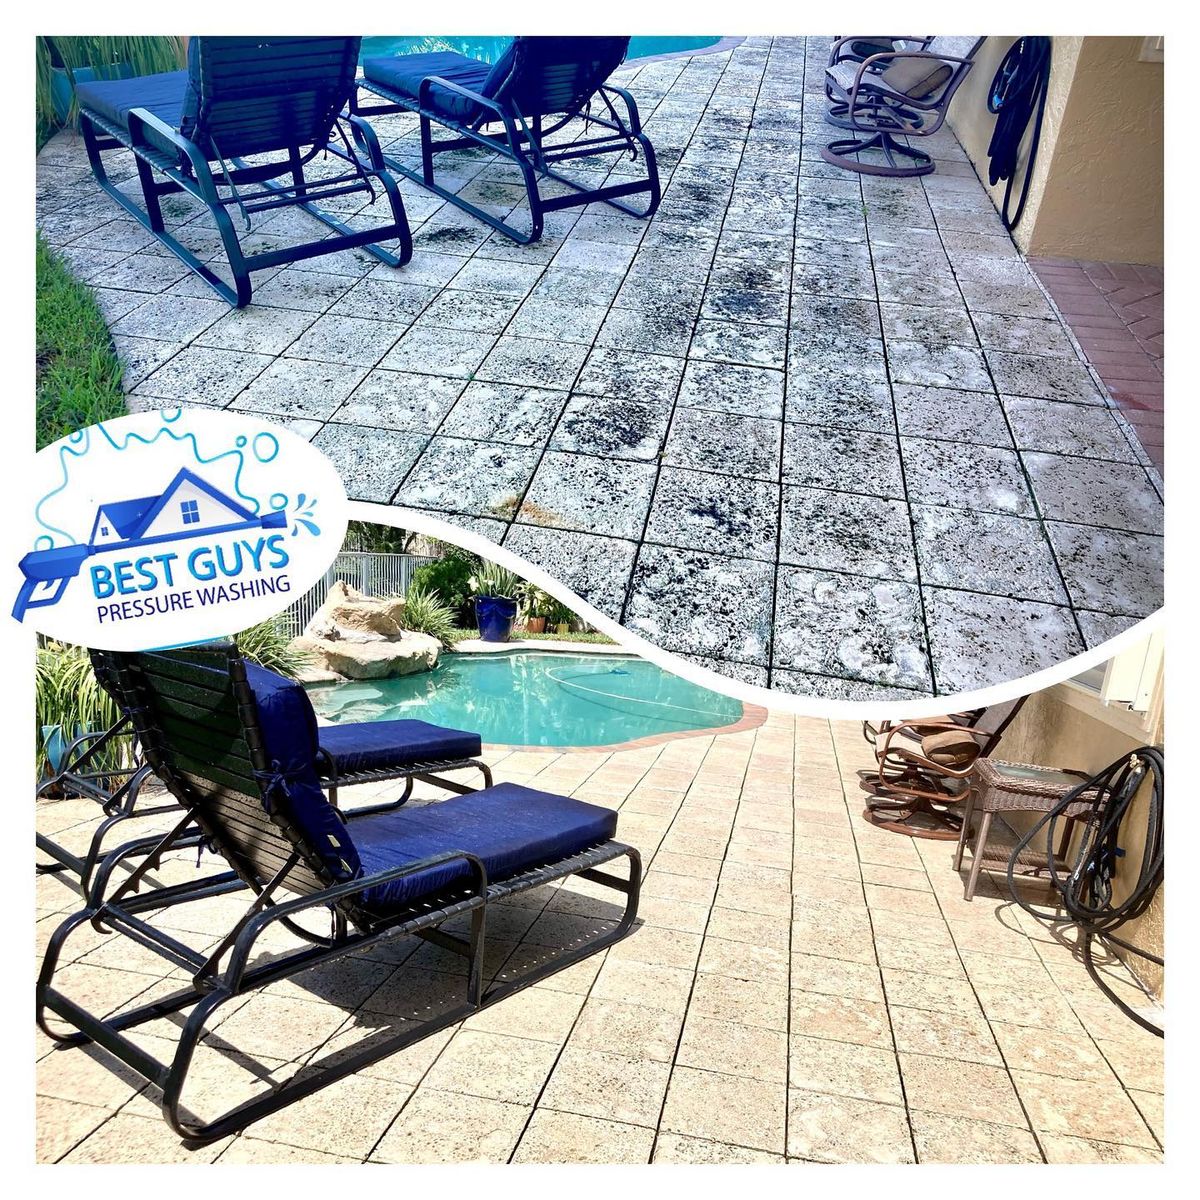 Deck & Patio Cleaning for Best Guys Pressure Washing in Boca Raton, FL